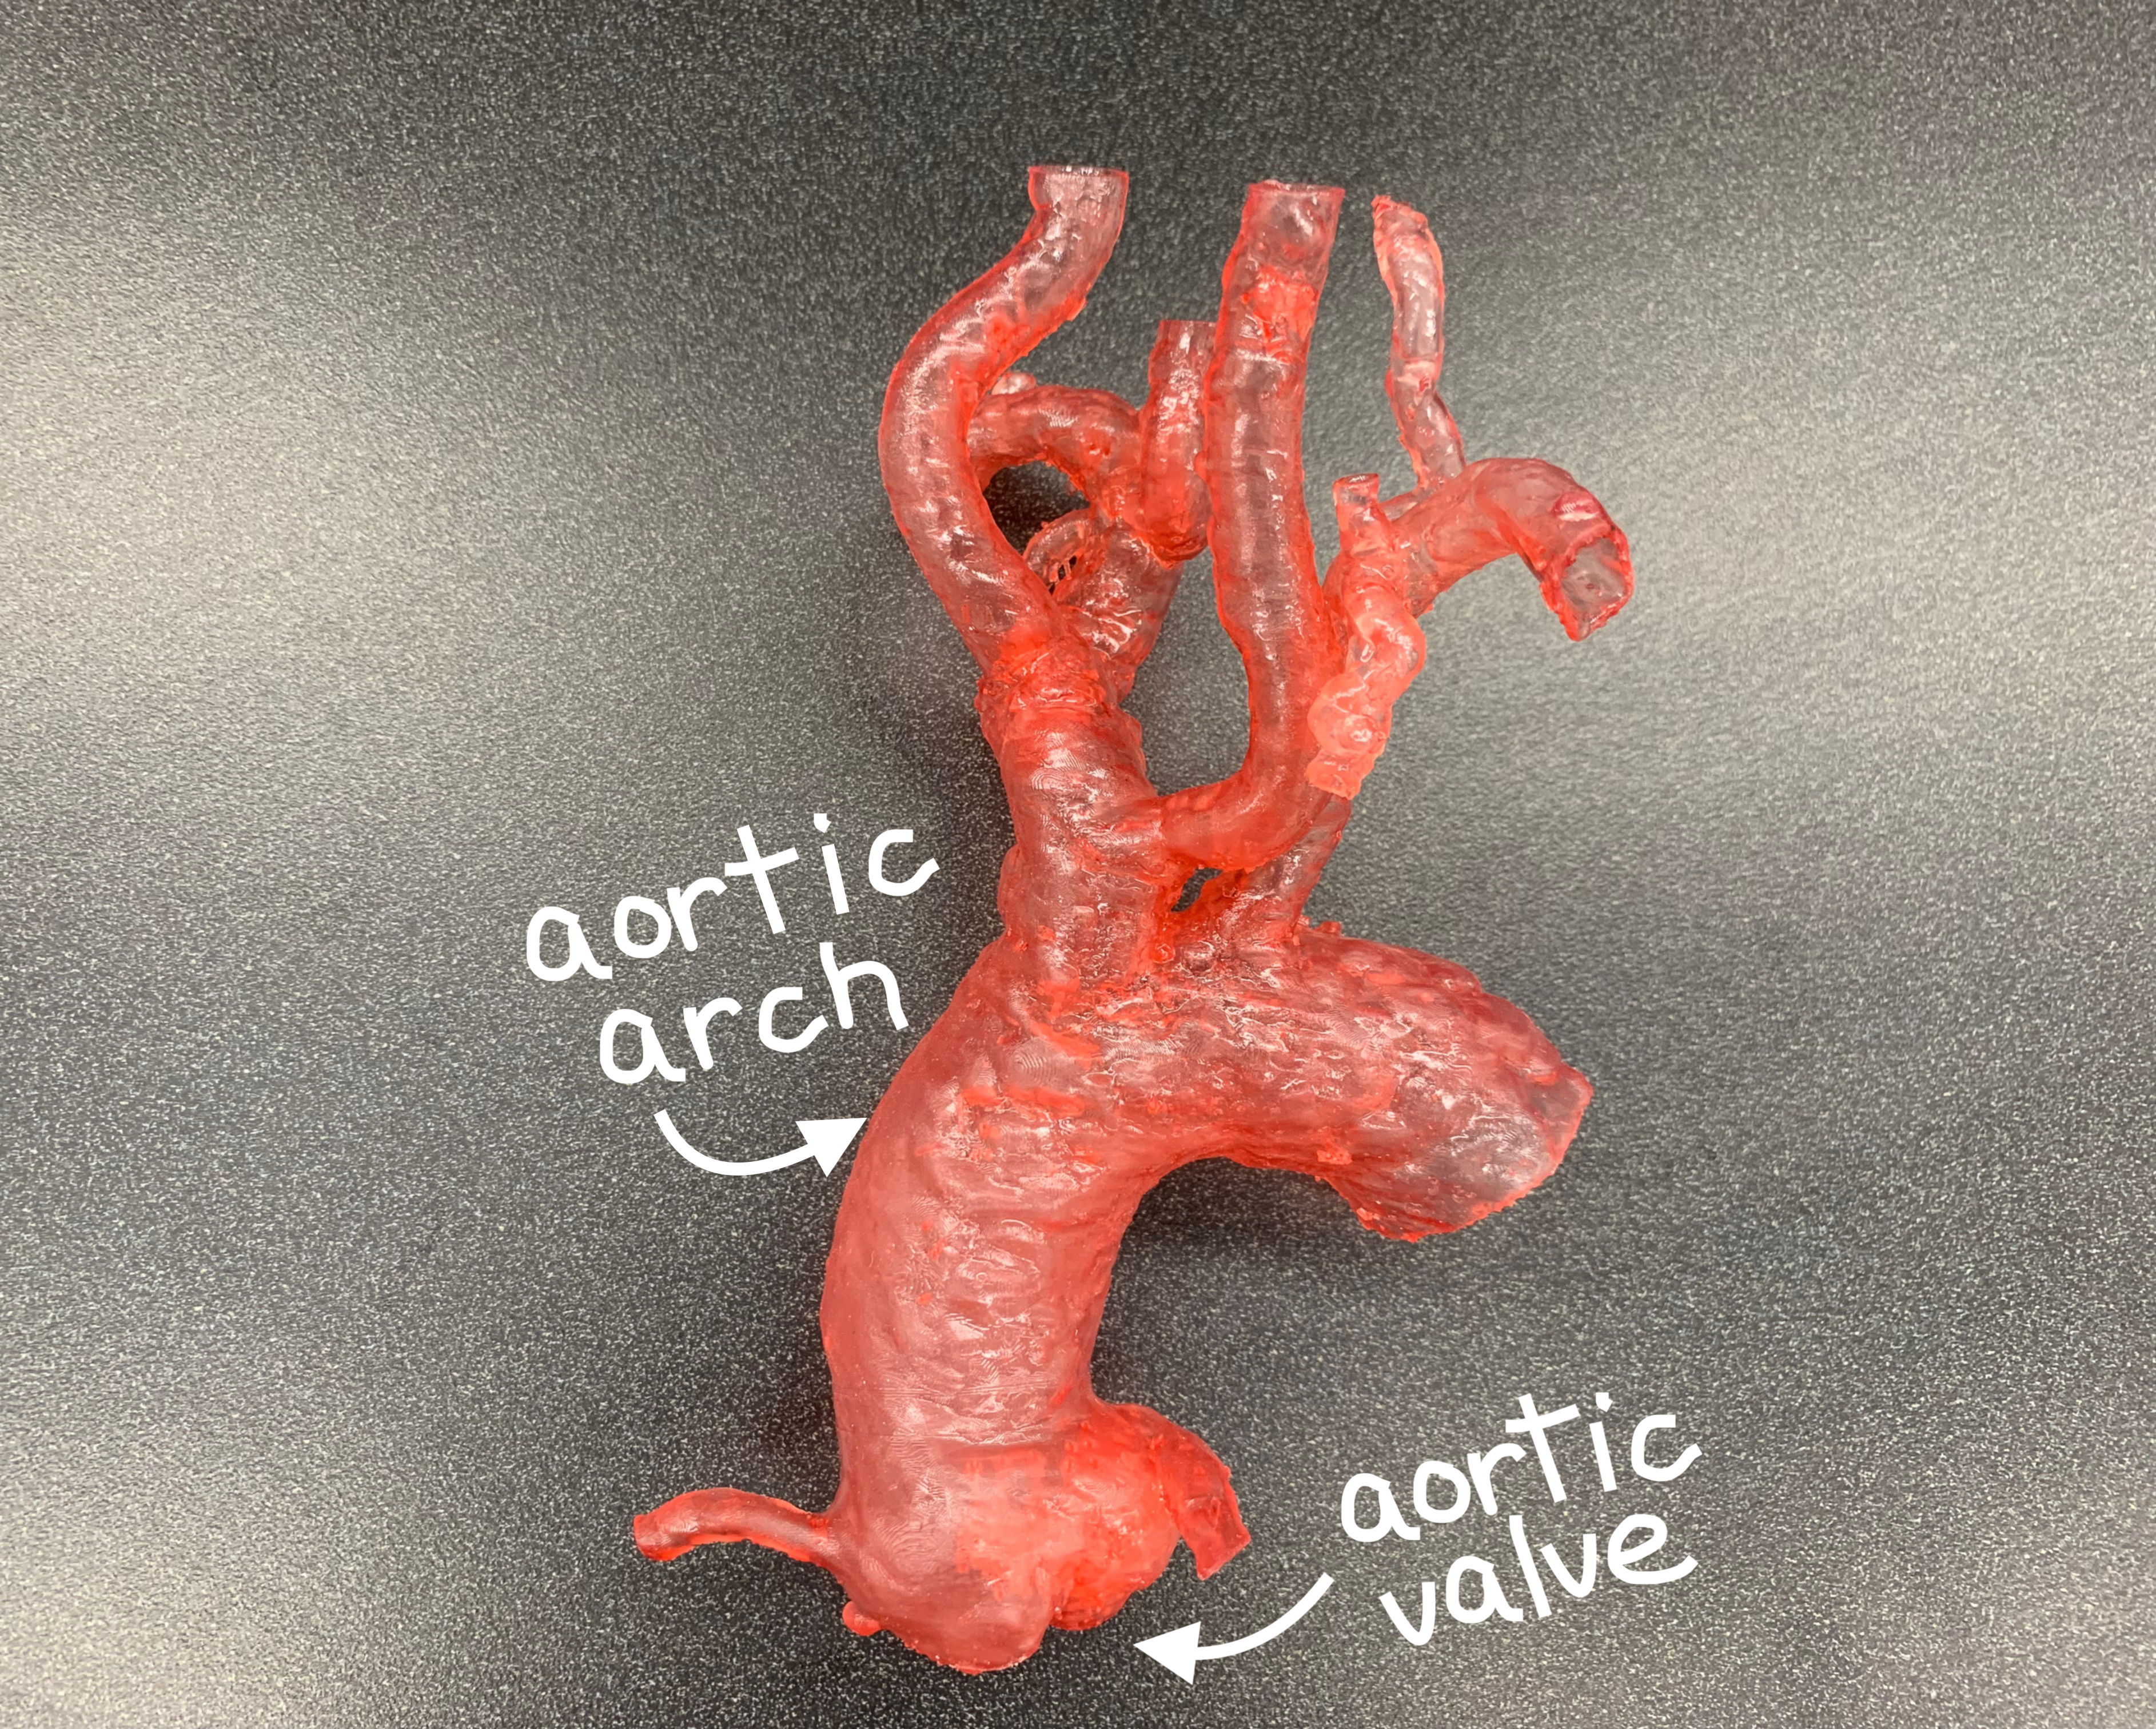 Aortic arch annotated on 3D printed model to support procedural planning for treatment of mitral valve disease. Photo via VA Puget Sound Health Care System